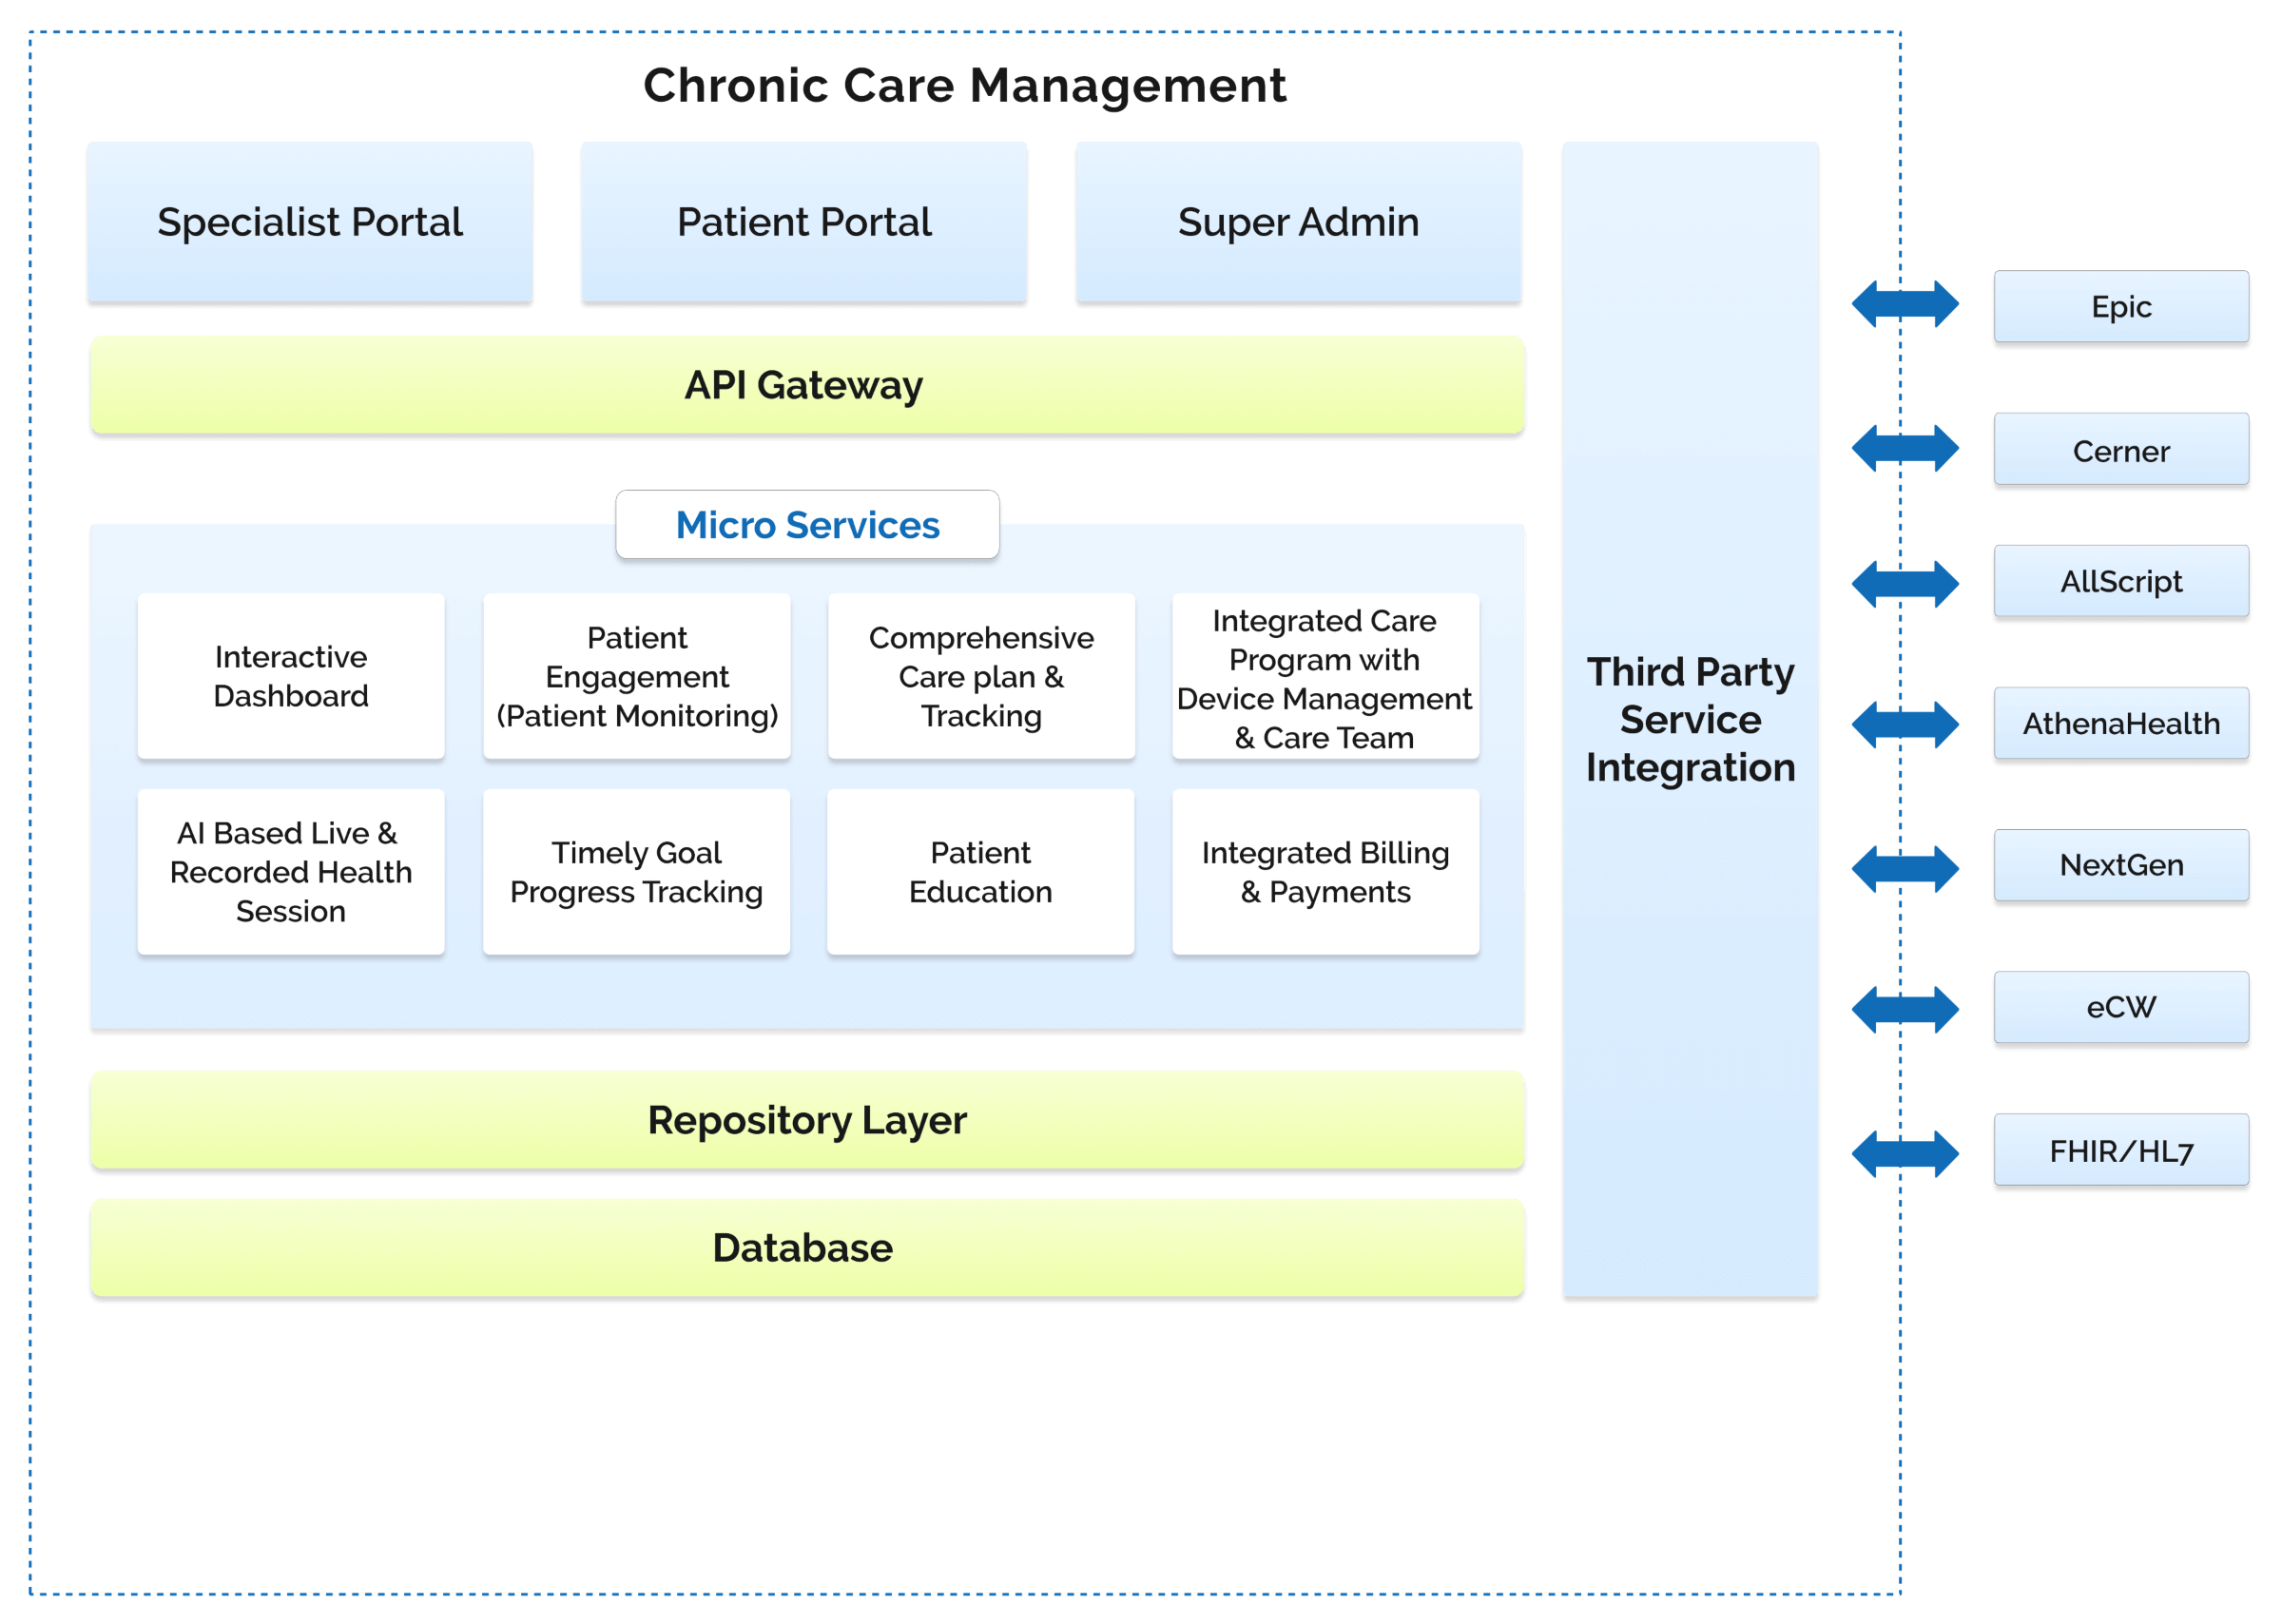 Architecture diagram for CCM system promoting proactive medical care with patient and provider portals, data management, and care coordination.